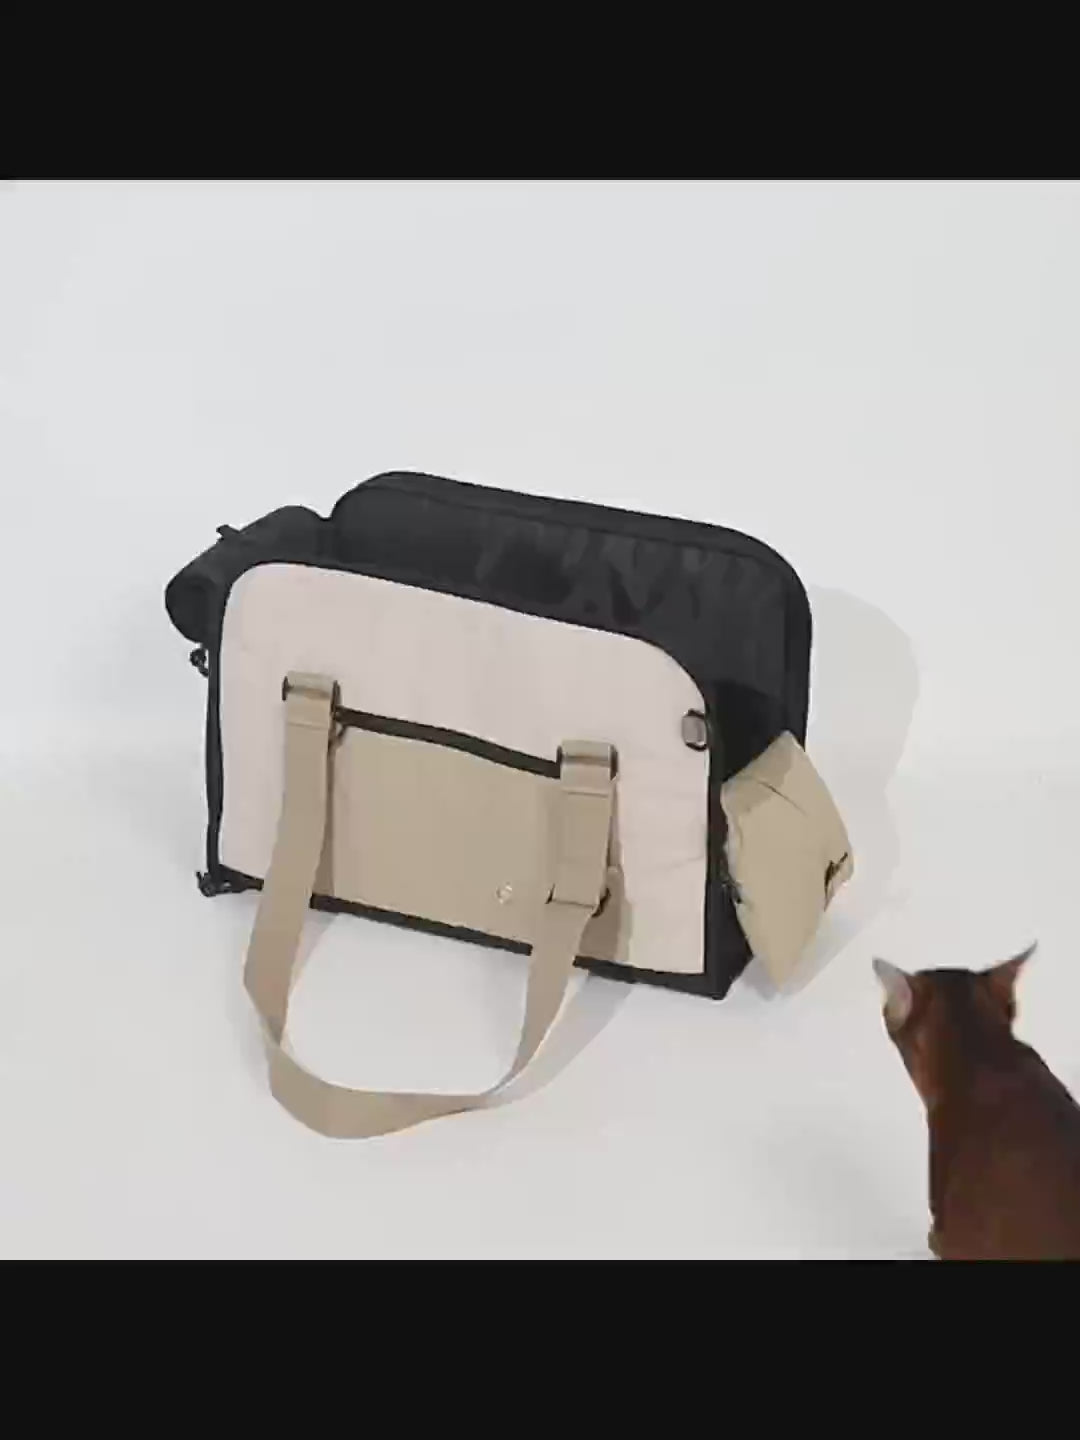 Discover Pawsitivity's Pet Carrier: Air-compliant travel bag for dogs and cats. Indulge your pet in comfort and convenience. The spacious opening ensures easy entry and exit. The bottom is supported with a removable fiber board for excellent support; Crafted from waterproof, scratch-resistant and premium-grade nylon. Shop Now!